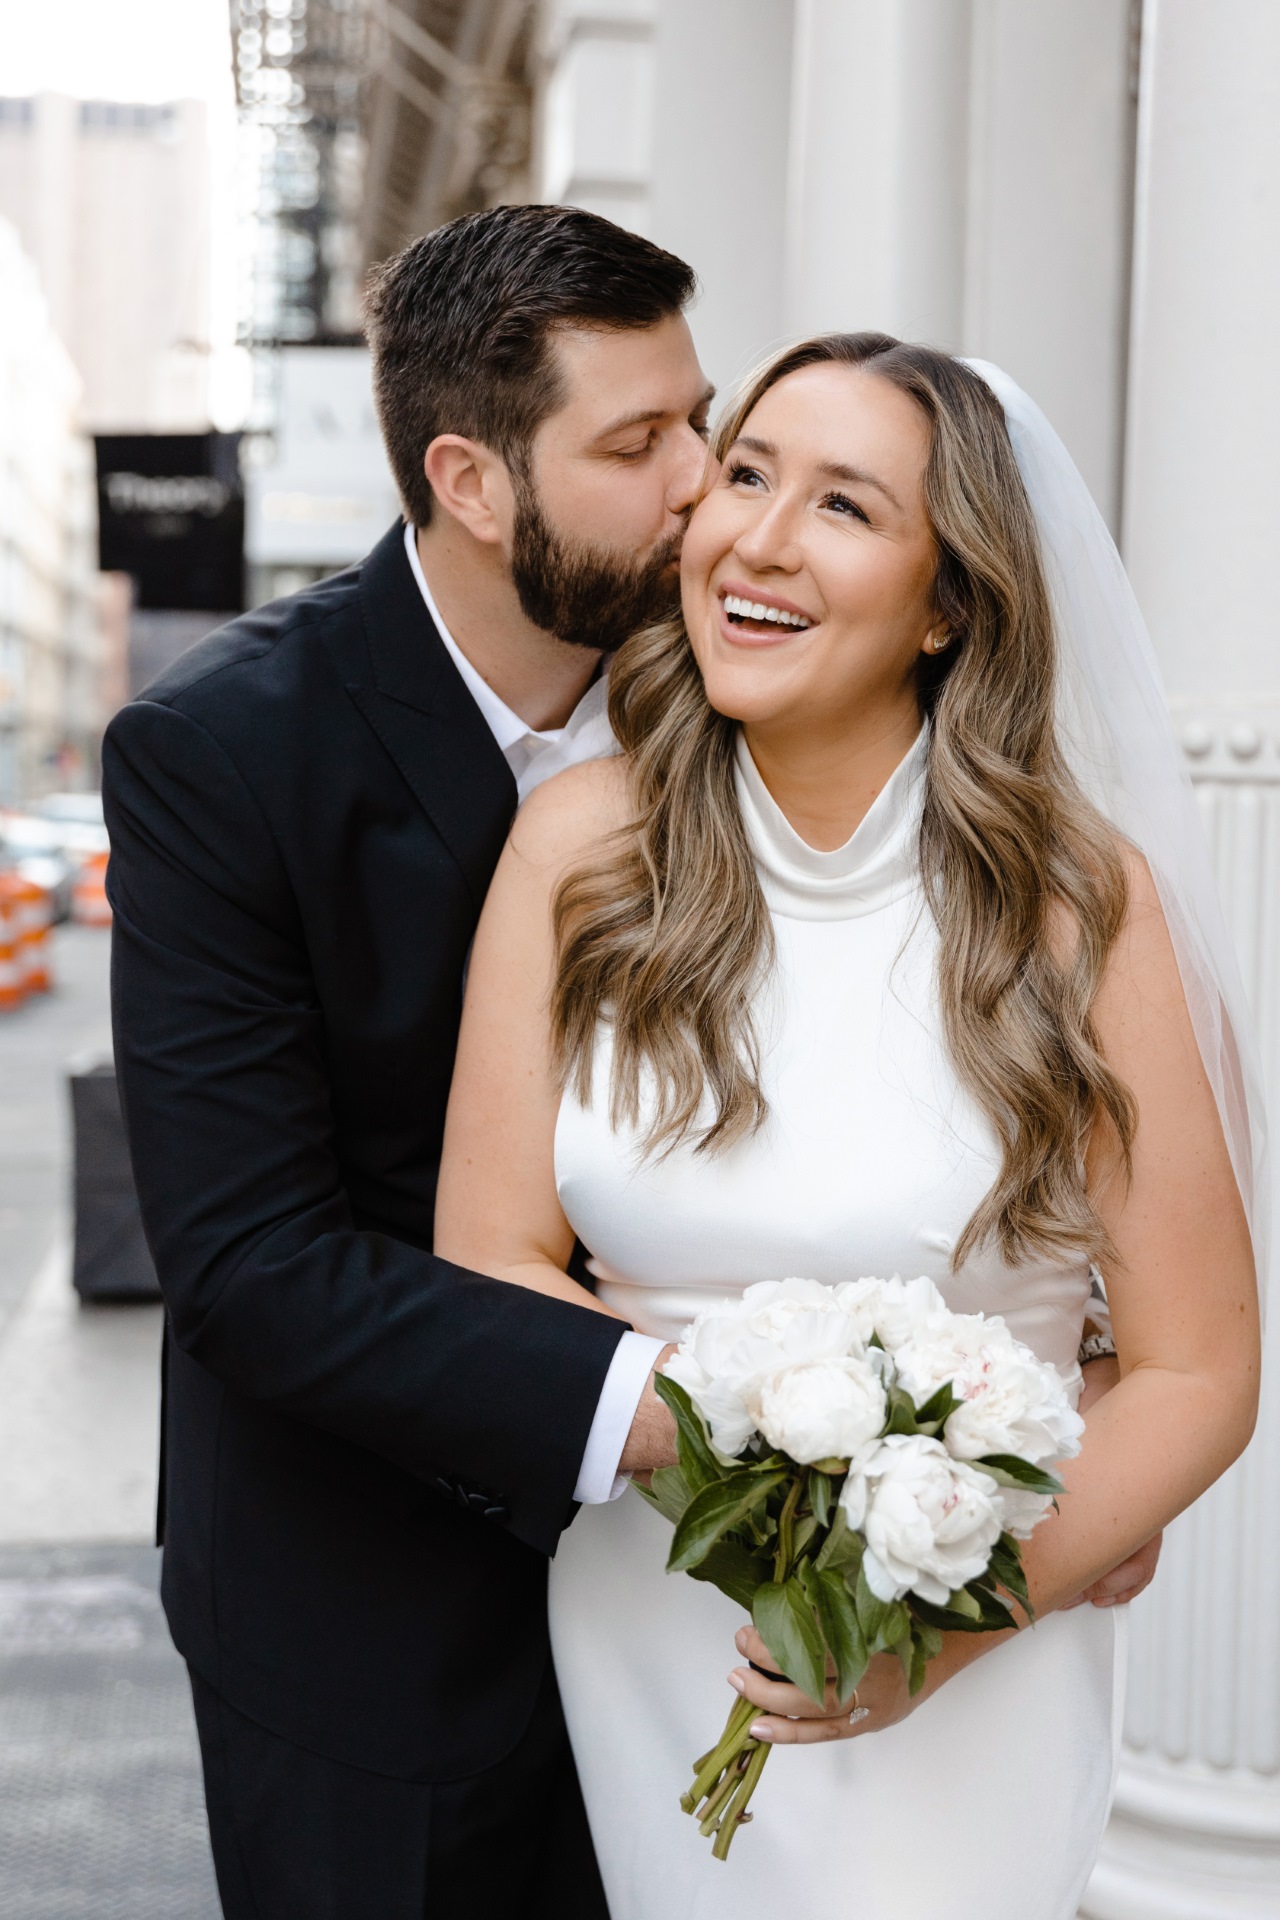 Engagement photos in soho nyc (10)